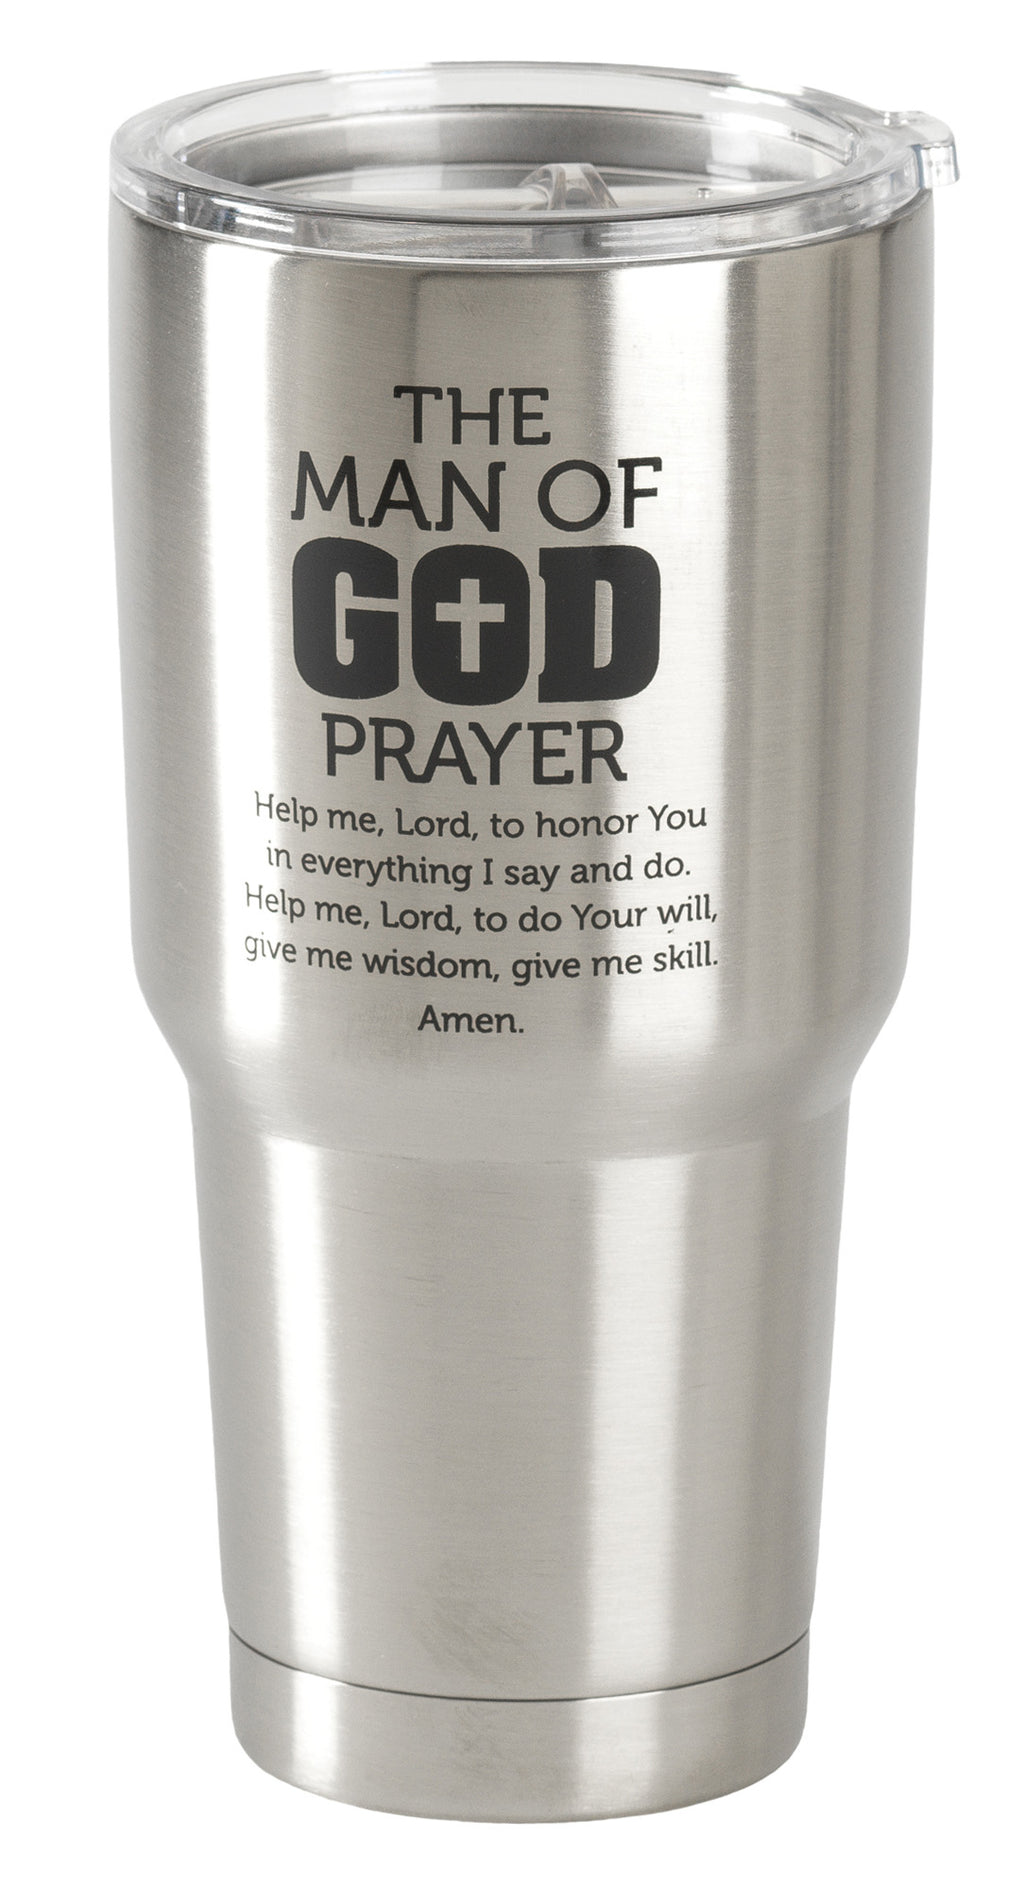 Dicksons Man of God Woodgrain Psalm 18:32 Insulated 16 oz. Stainless Steel Travel Mug with Lid